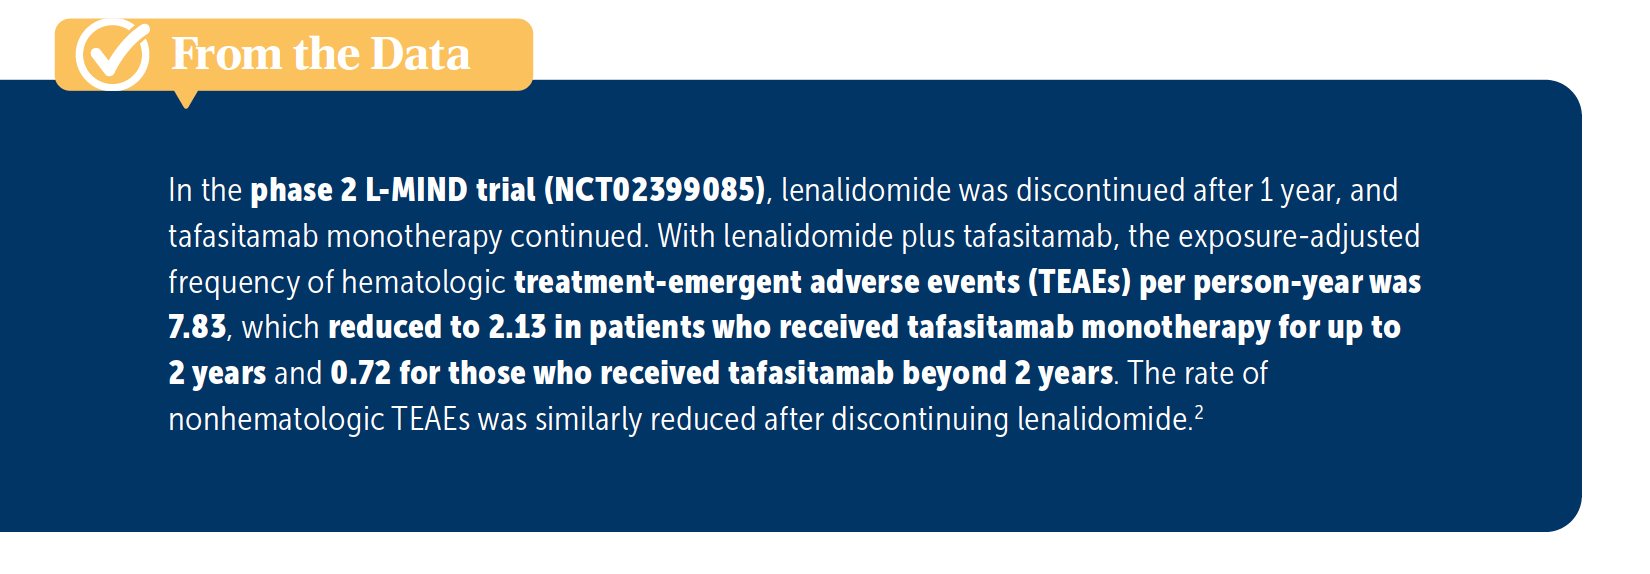 from the data: L-MIND trial discontinutation